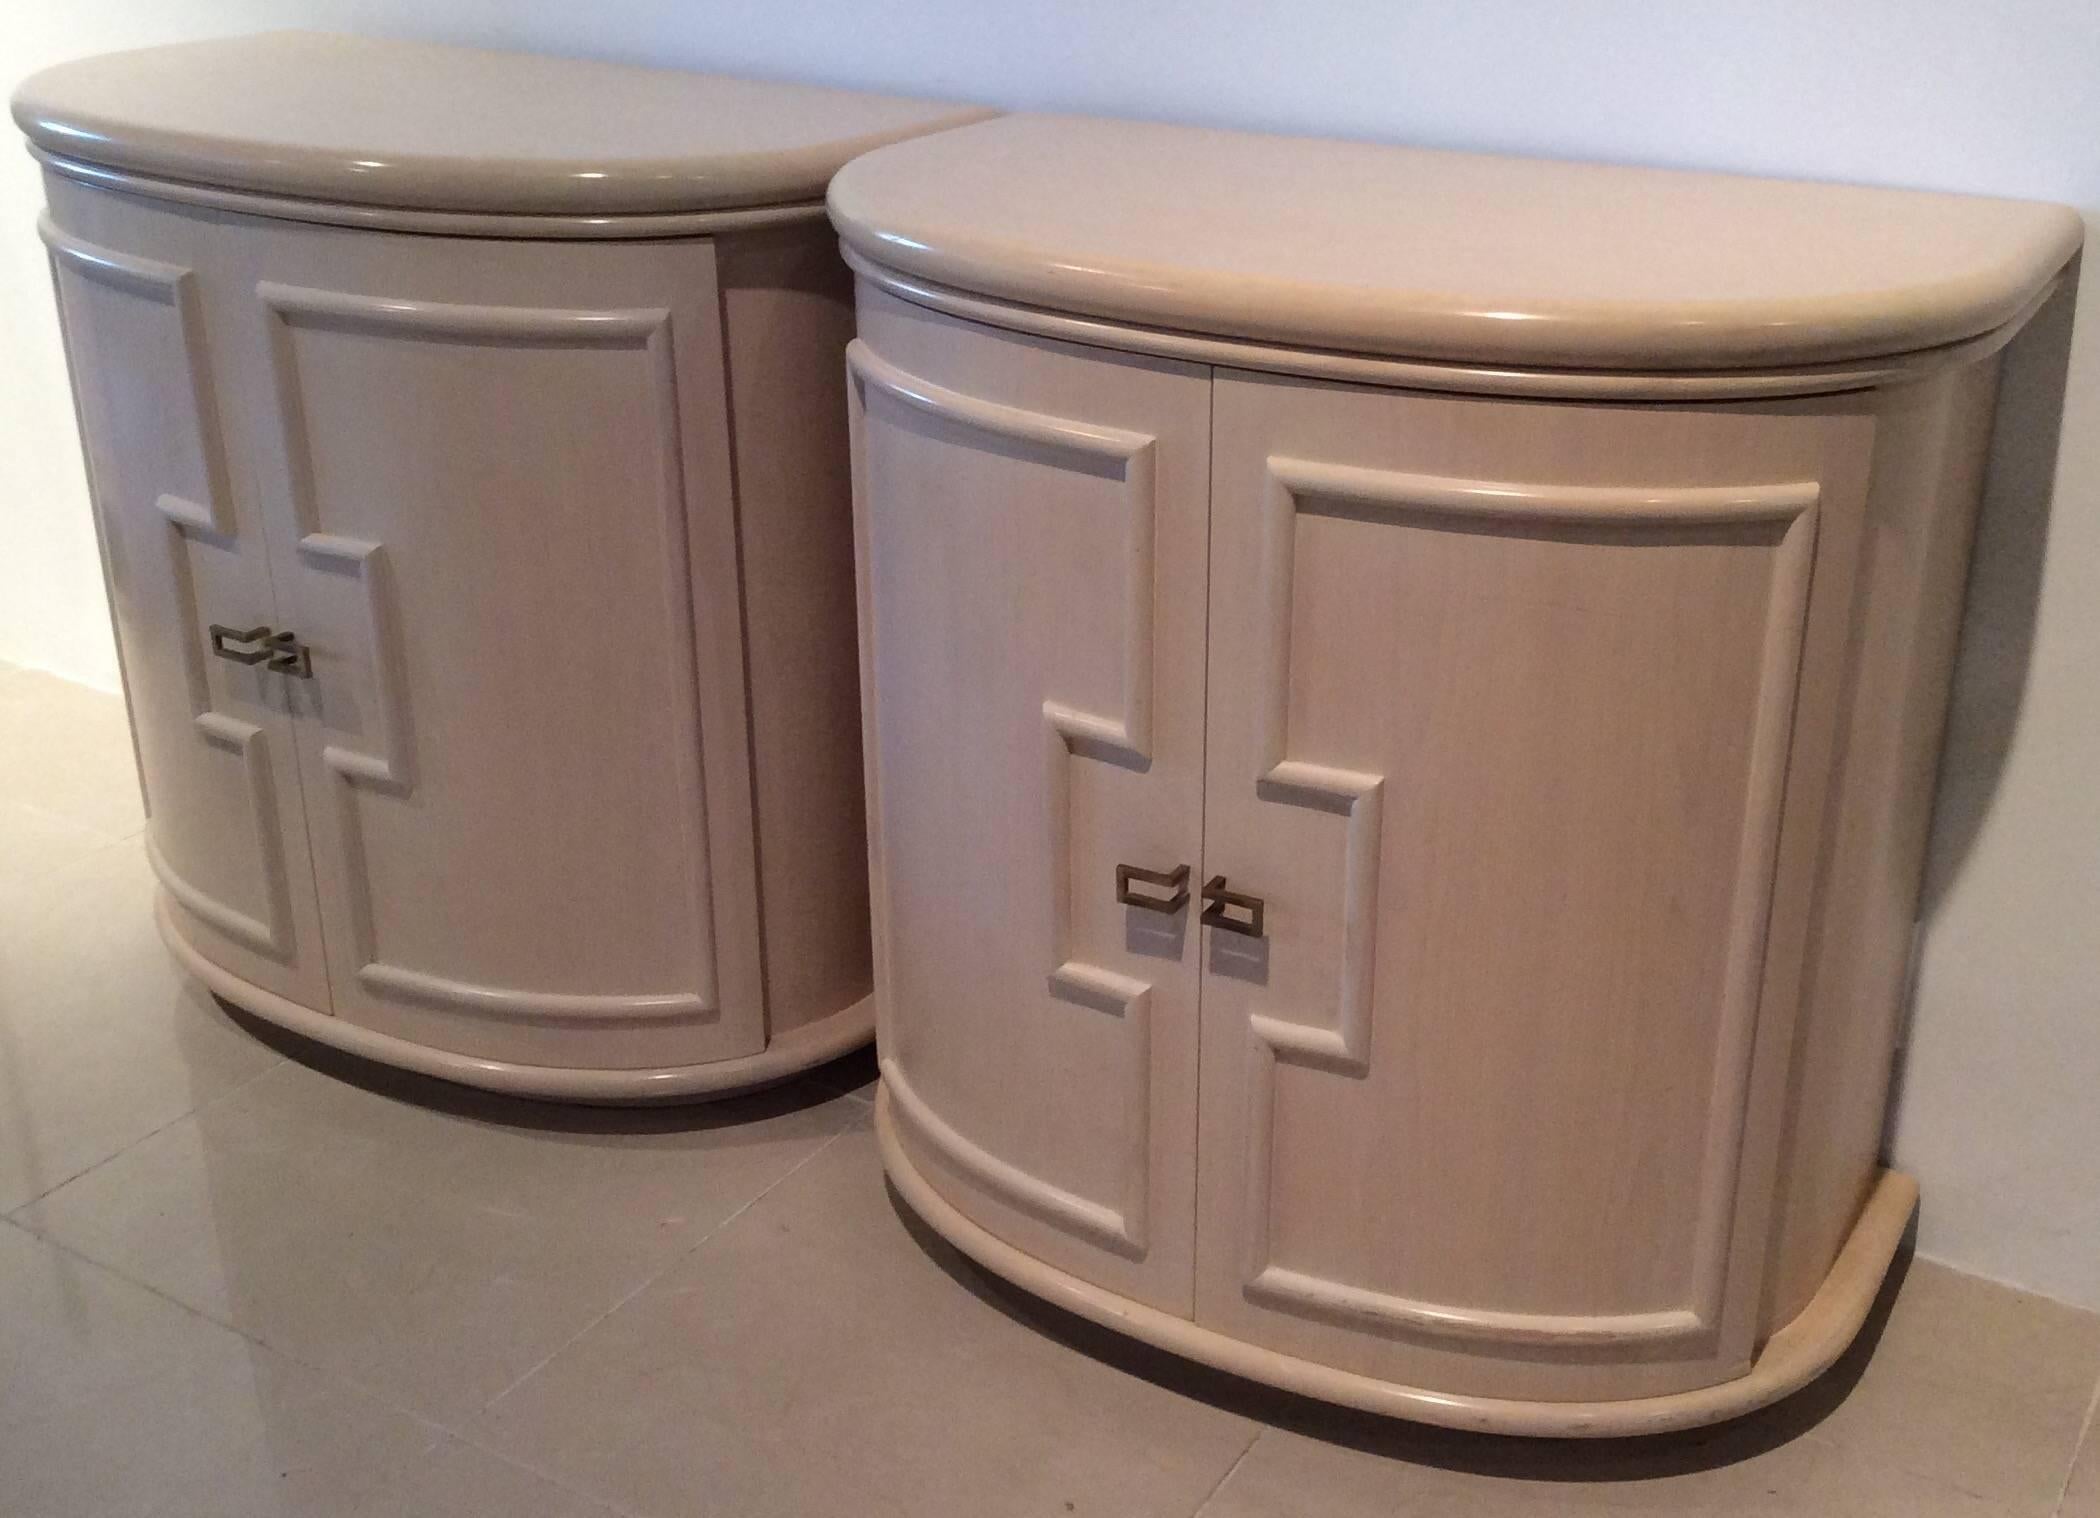 A vintage pair of Hollywood Regency demi lune, French curved door fronts, brass hardware, solid wood, Greek key style trim, oversized chests from Palm Beach. These are solid wood with a shelf inside. Original vintage finish which has a few scuffs to